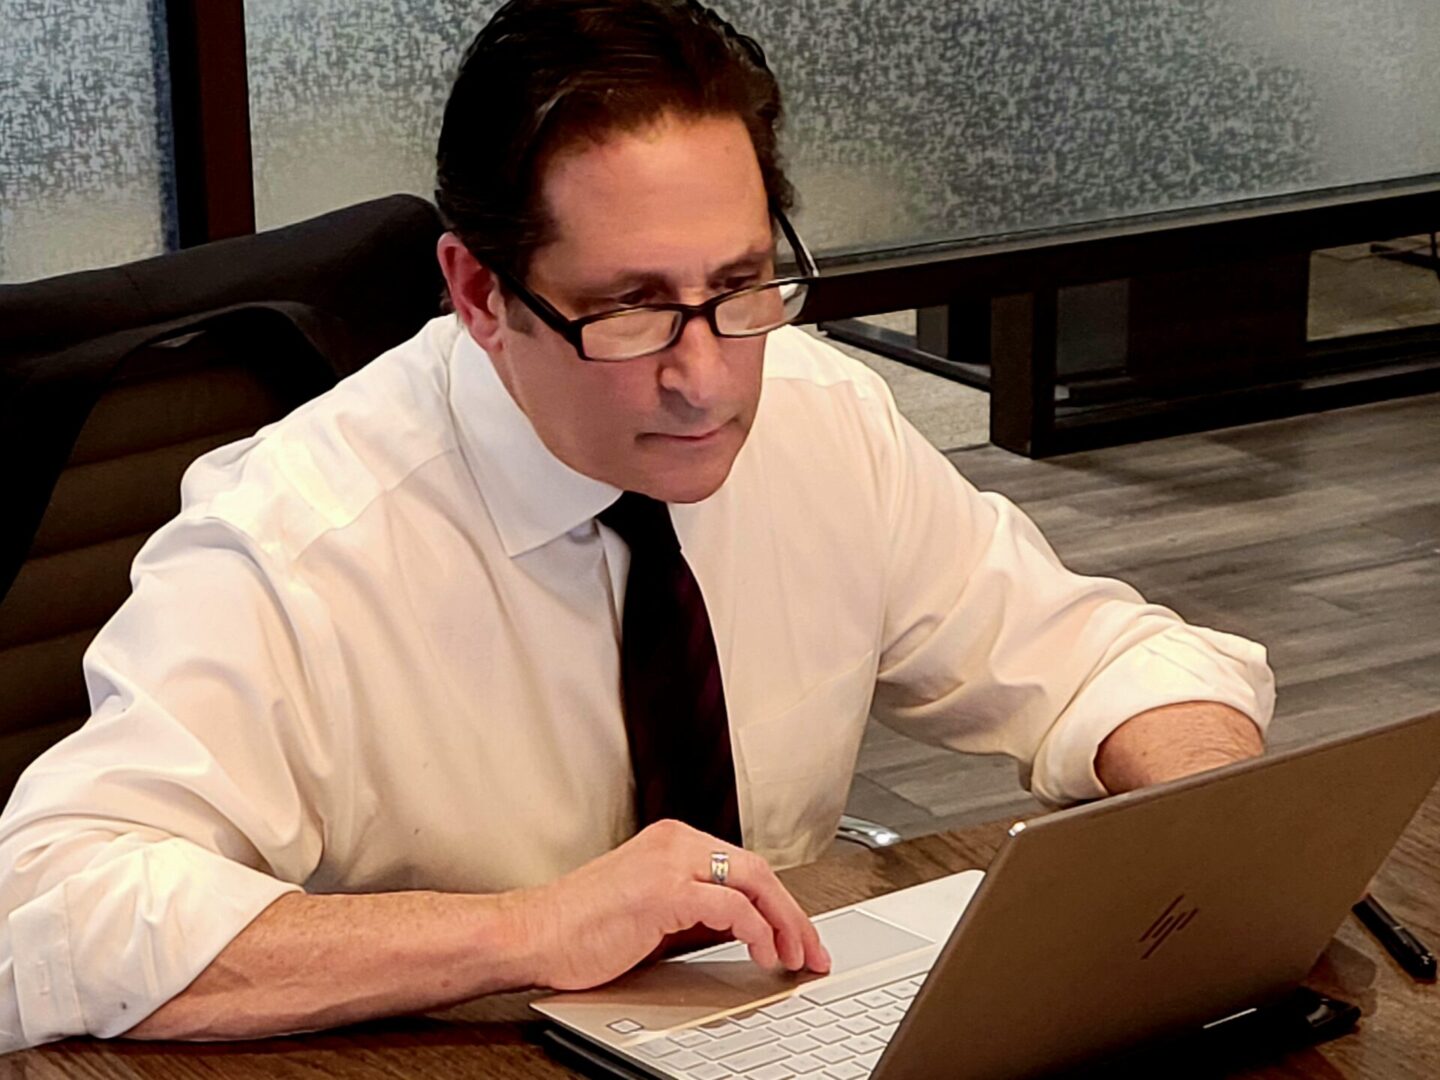 A man in glasses and a tie is on his laptop